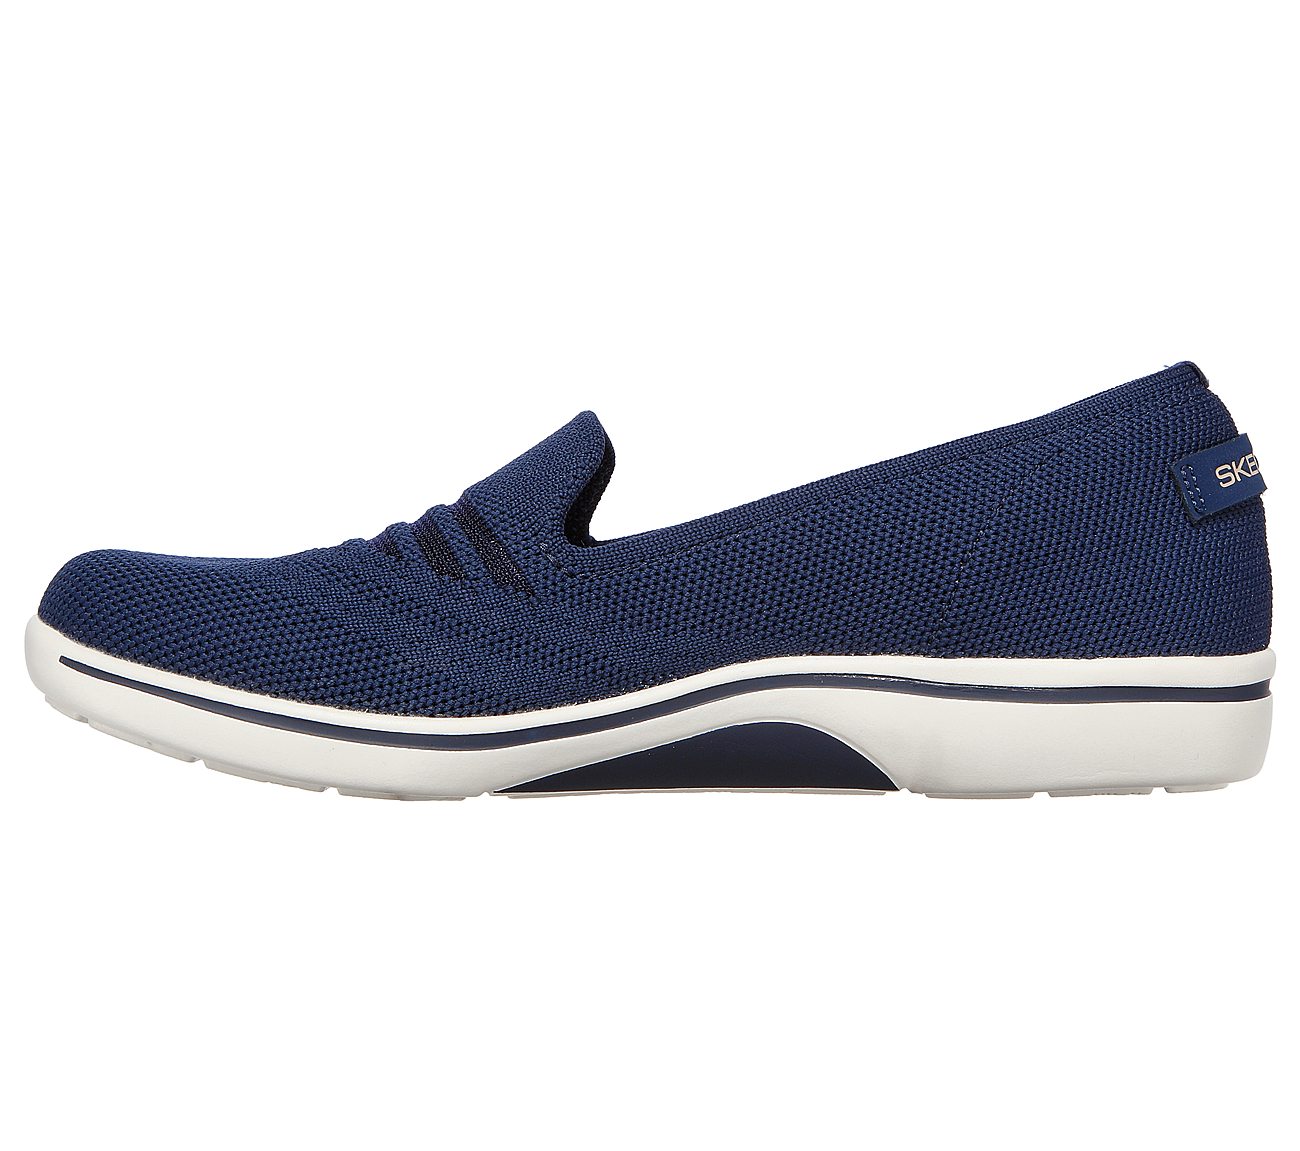 ARCH FIT UPLIFT-CUTTING EDGE, NNNAVY Footwear Left View